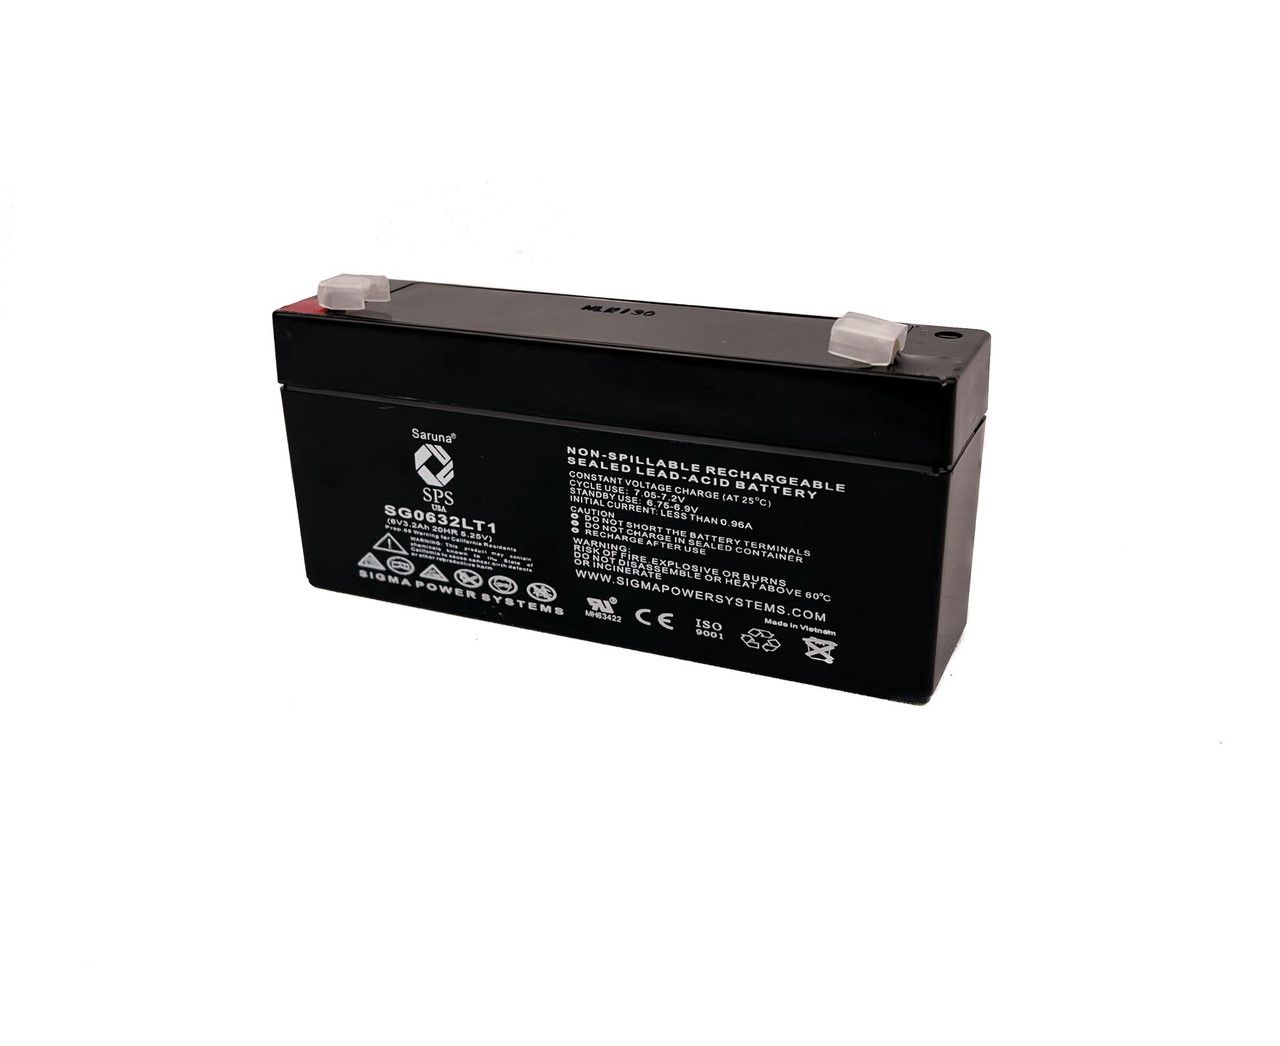 Raion Power 6V 3.2Ah Non-Spillable Replacement Rechargebale Battery for Alaris Medical 591 StarFlow Pump